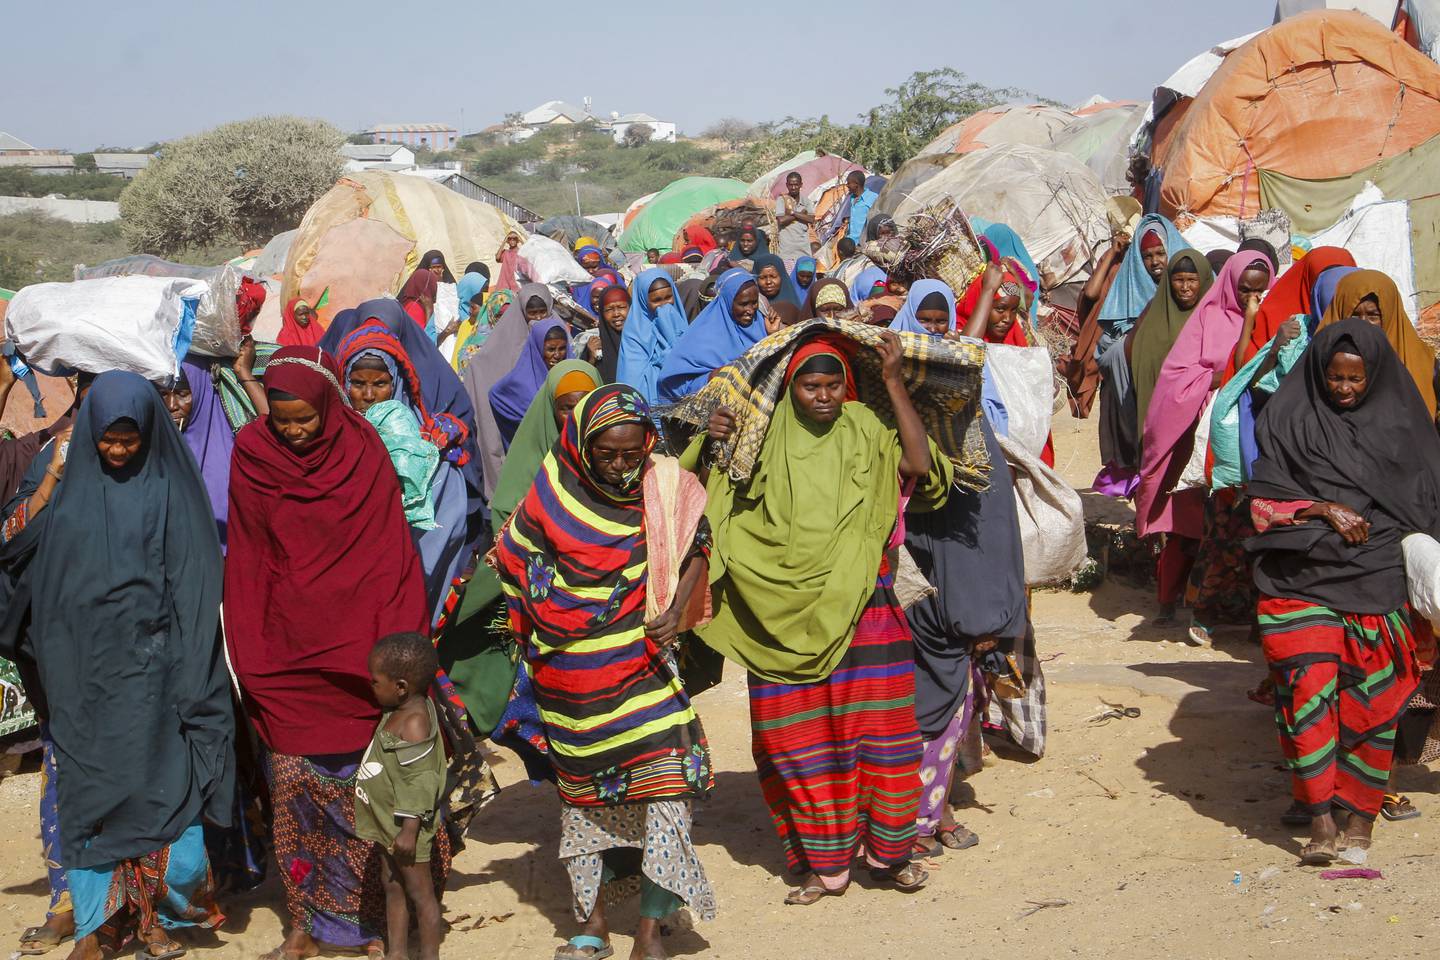 Somalis who fled drought-stricken areas carry their belongings as they arrive at a makeshift camp on the outskirts of the capital Mogadishu, Somalia Friday, Feb. 4, 2022. Thousands of desperate families have fled a severe drought across large parts of Somalia, seeking food and water in camps for displaced people outside the capital. (AP Photo/Farah Abdi Warsameh)